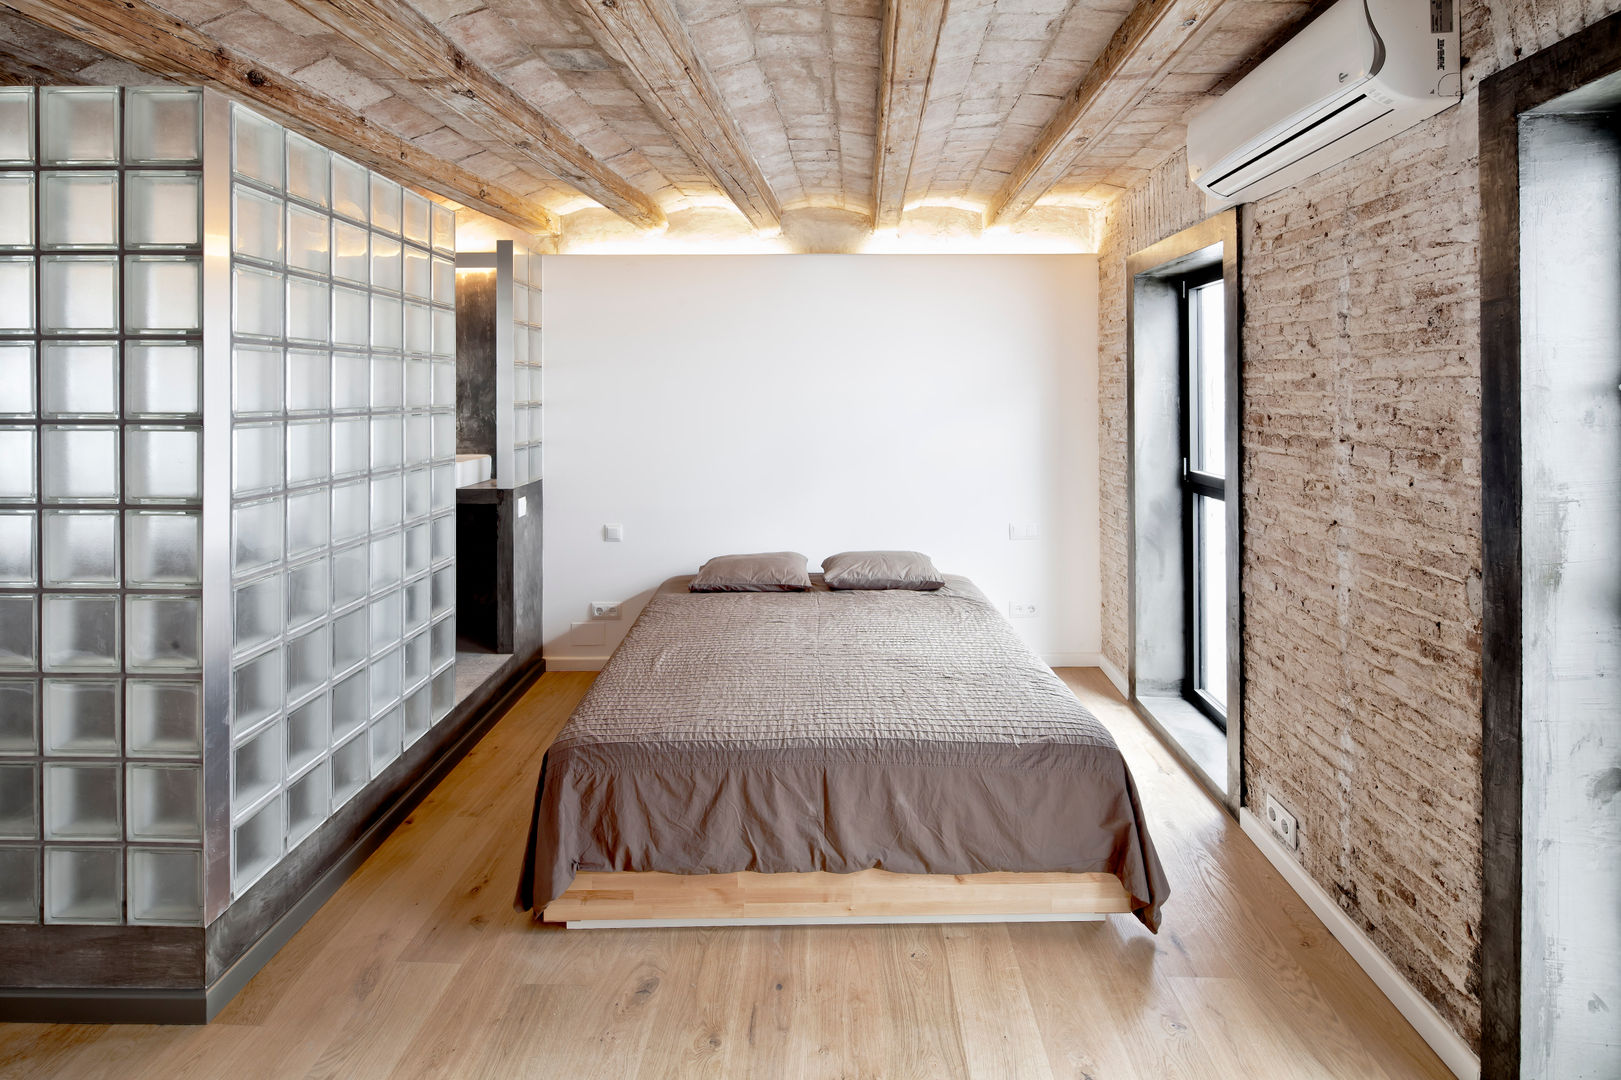 FLAT FOR A PHOTOGRAPHER, Alex Gasca, architects. Alex Gasca, architects. Mediterrane Schlafzimmer